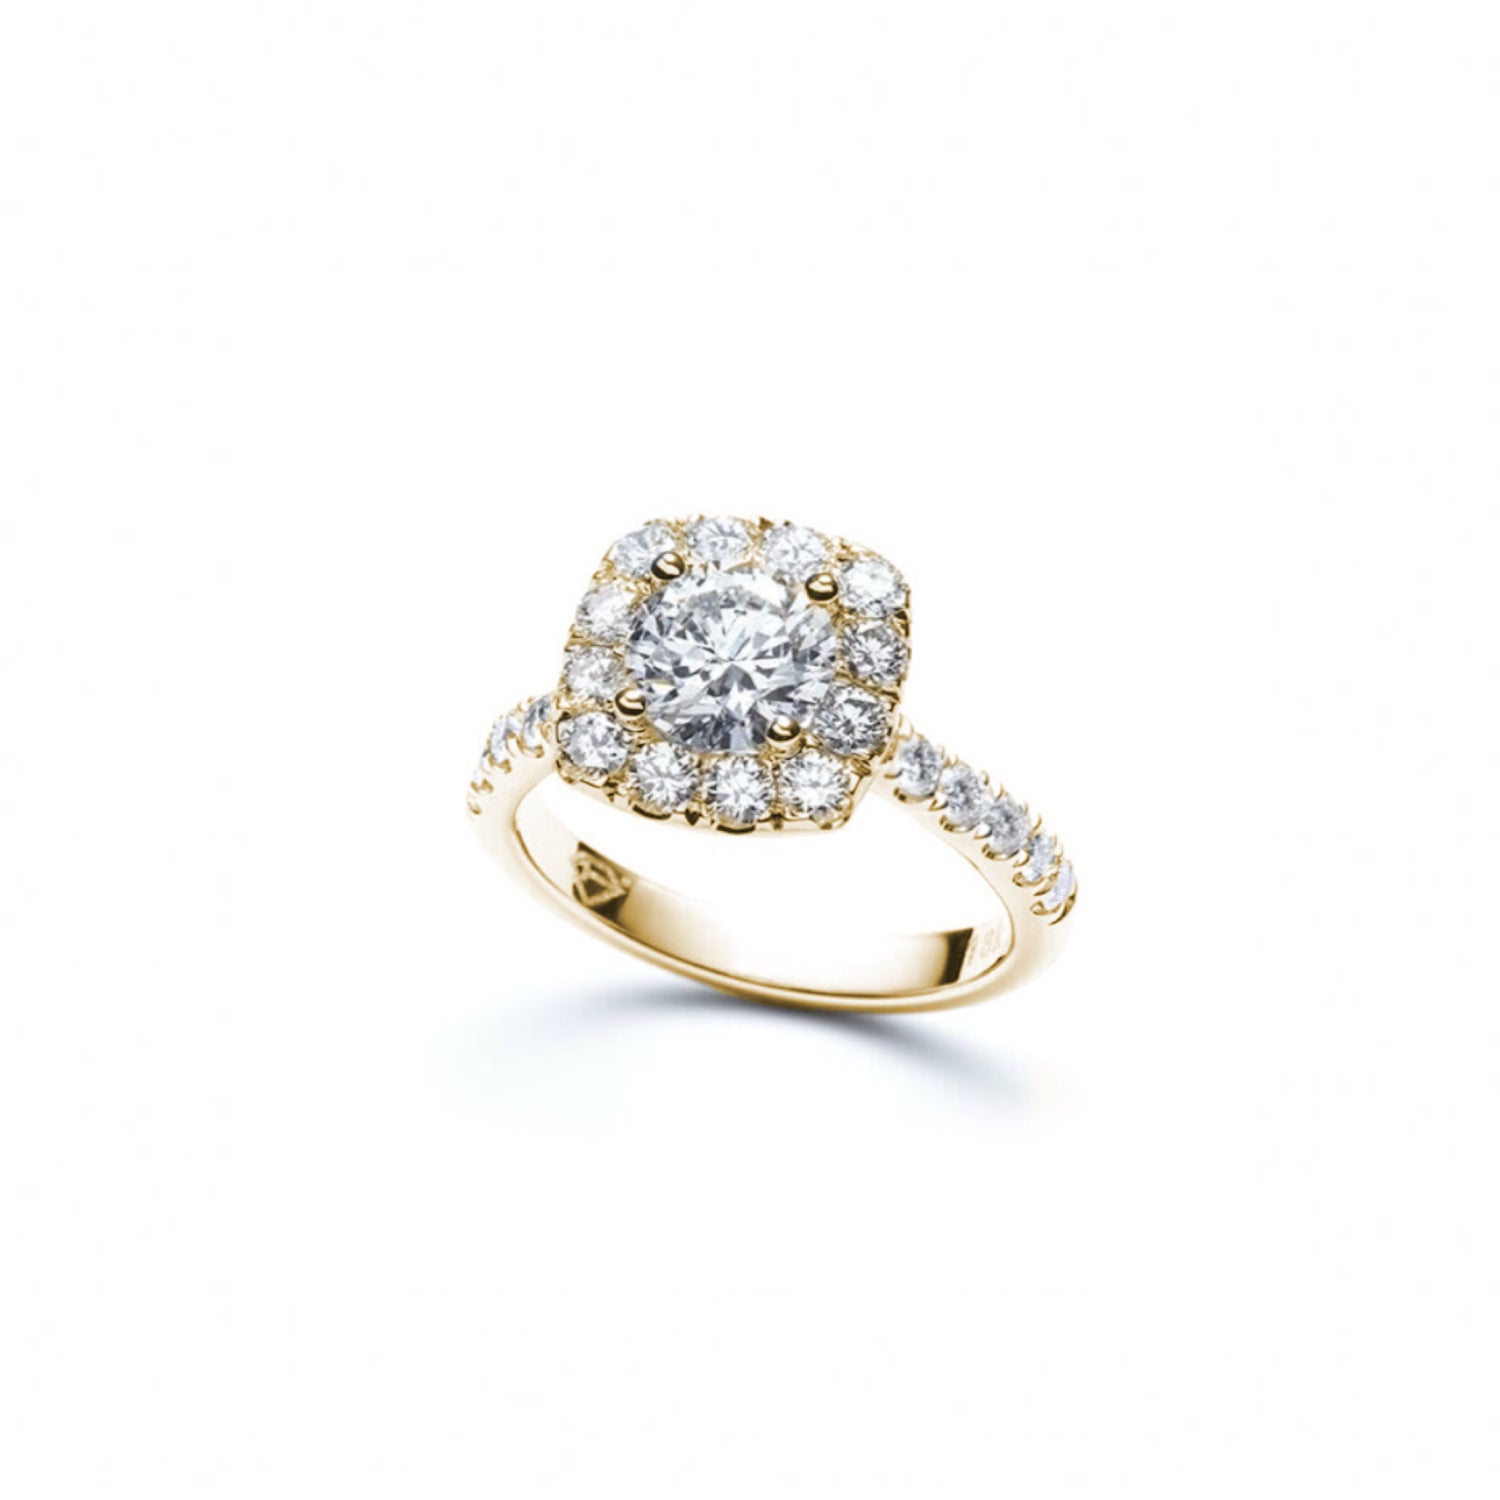 Round Brilliant Cut Diamond Square Halo Engagement Ring in Yellow Gold